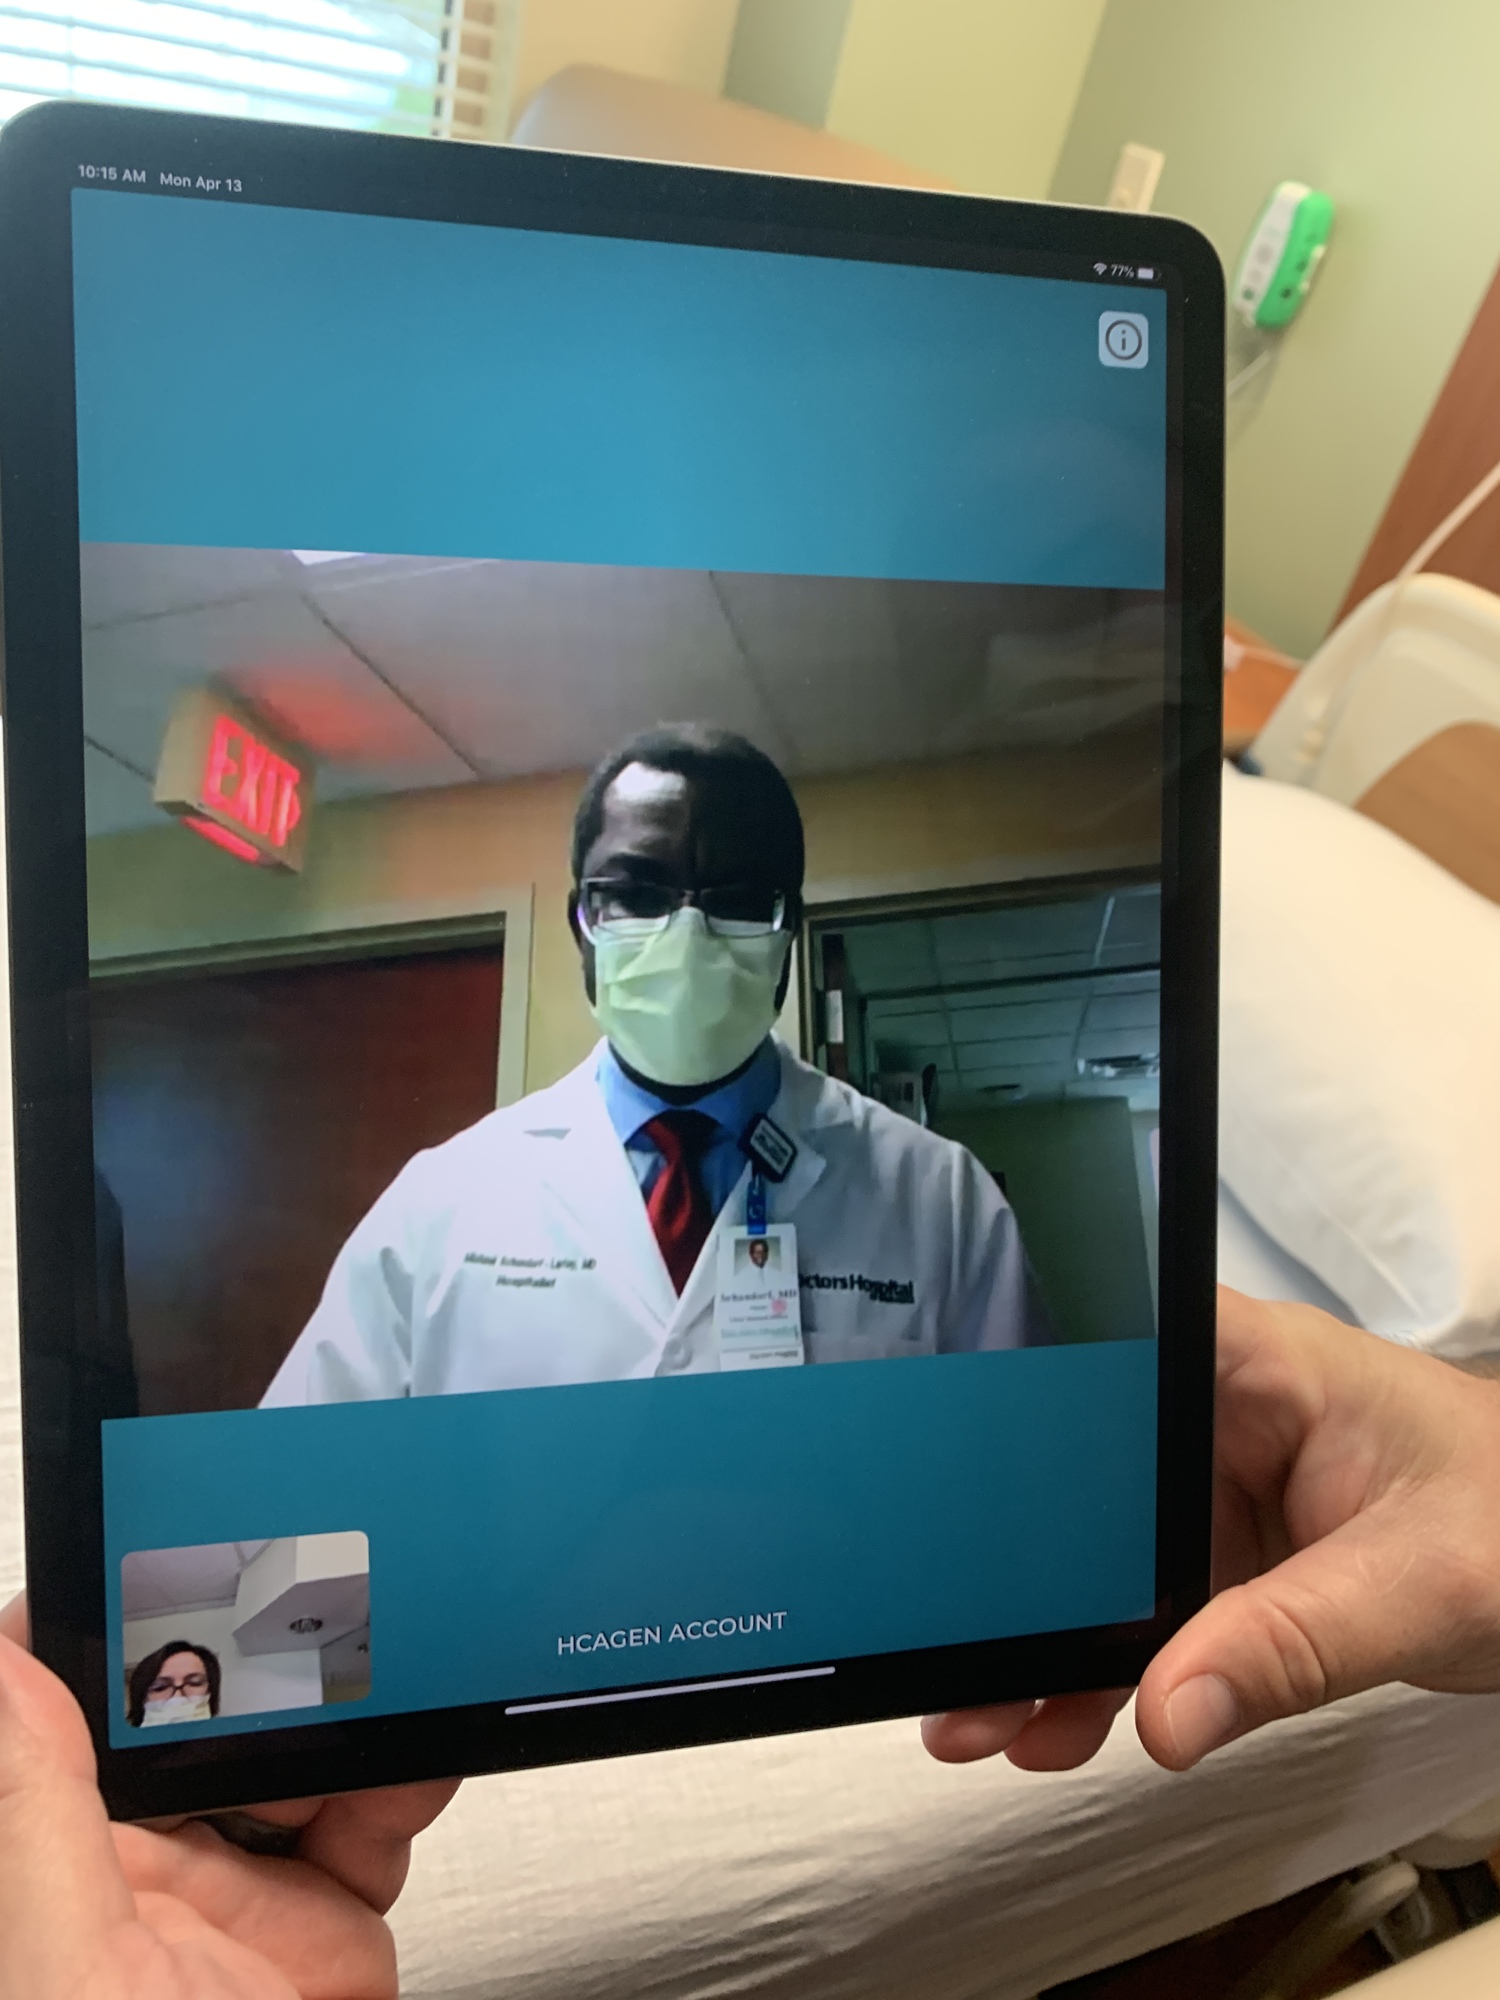 Doctors Hospital of Sarasota Chief Medical Officer Michael Schandorf-Lartey contacts patients remotely through video technology